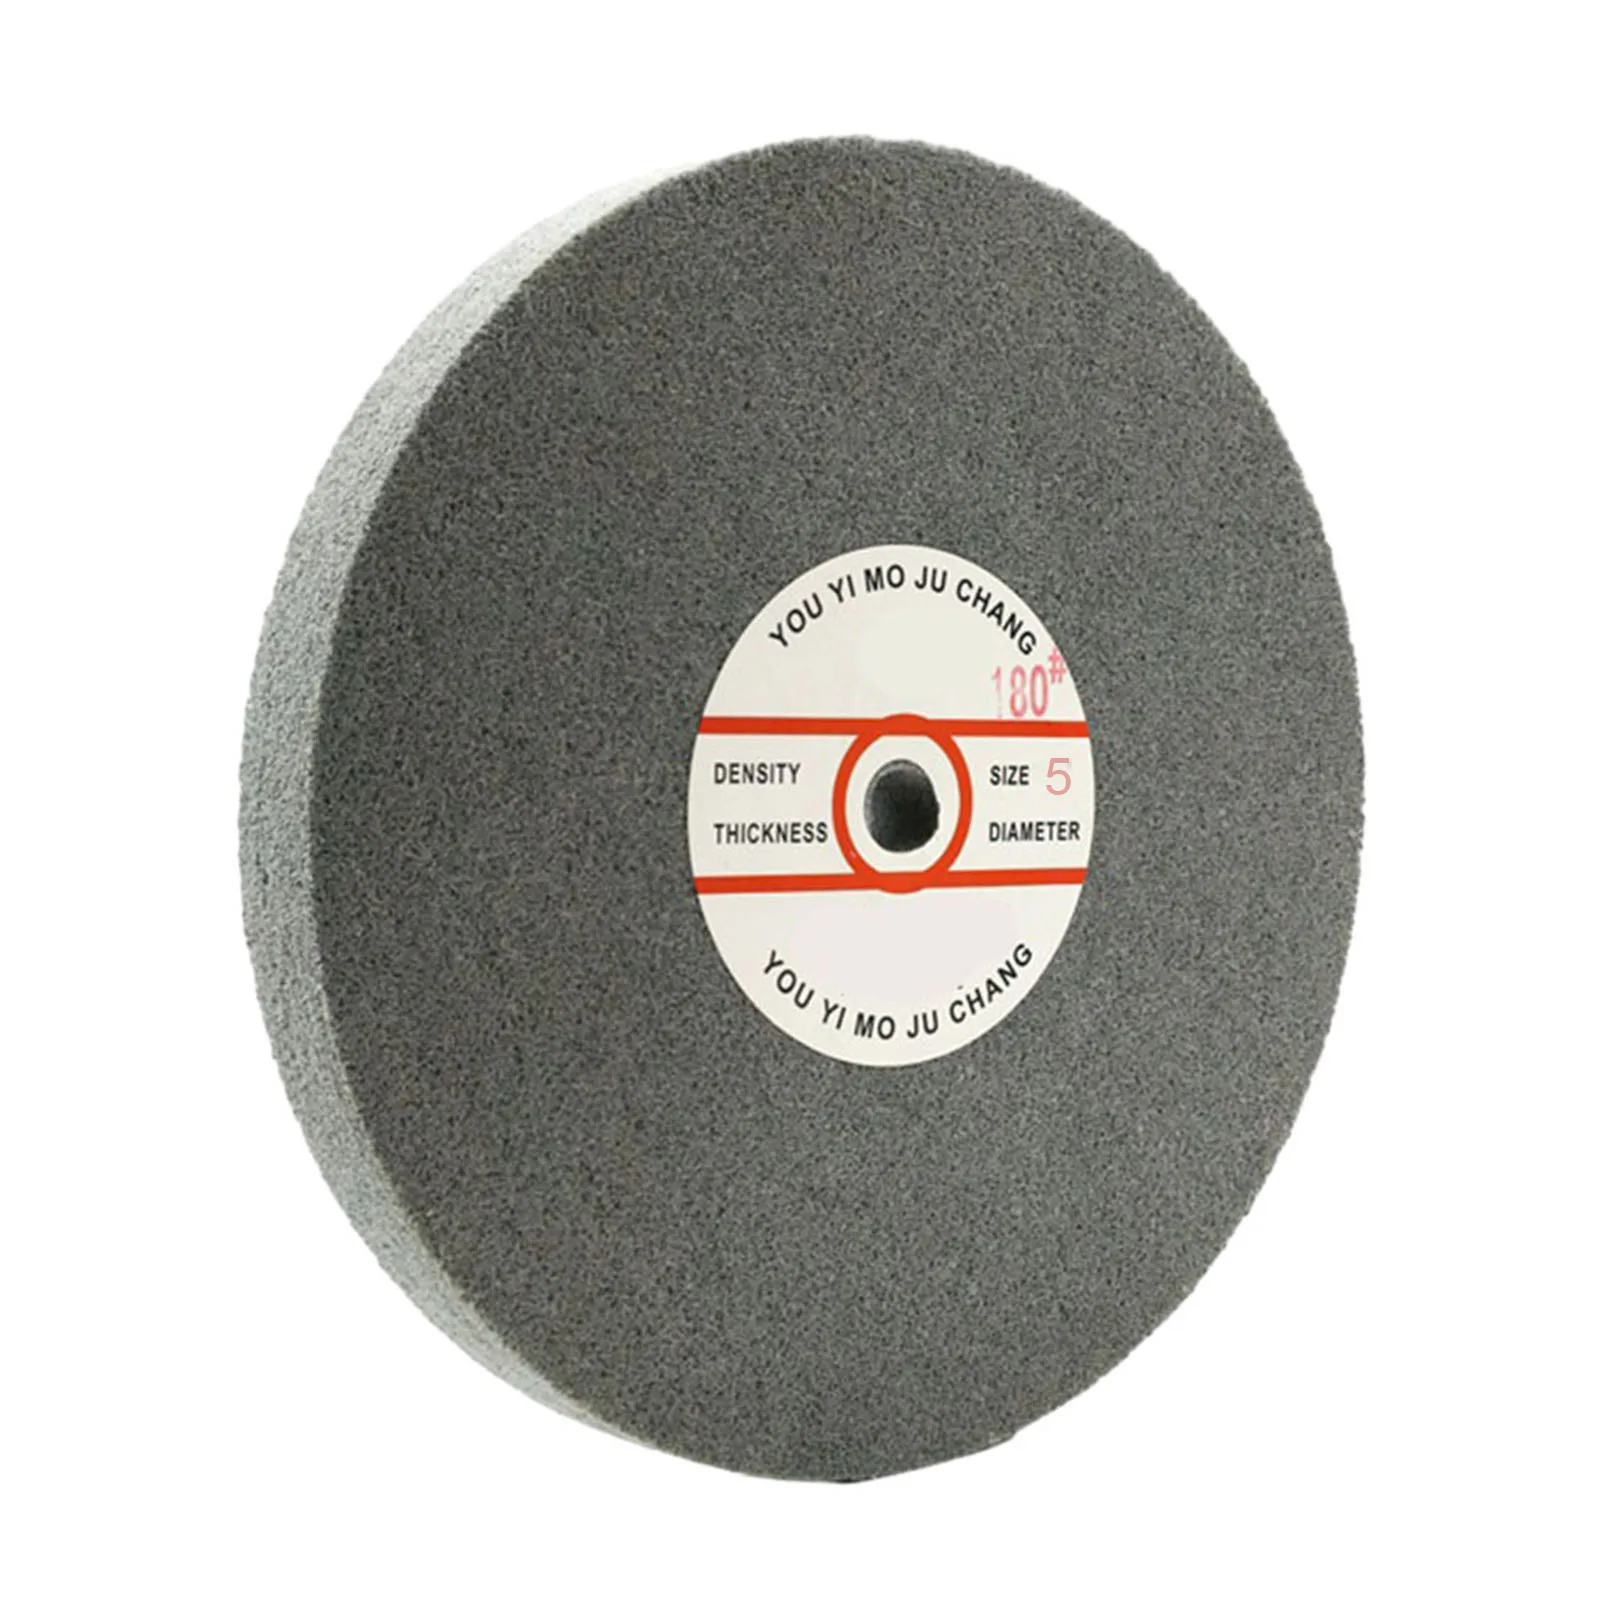 

8 inch Deburring Wheel Nylon Fiber Buffing Wheels Ideal for Polishing Architectural Hardware and Kitchen Utensils